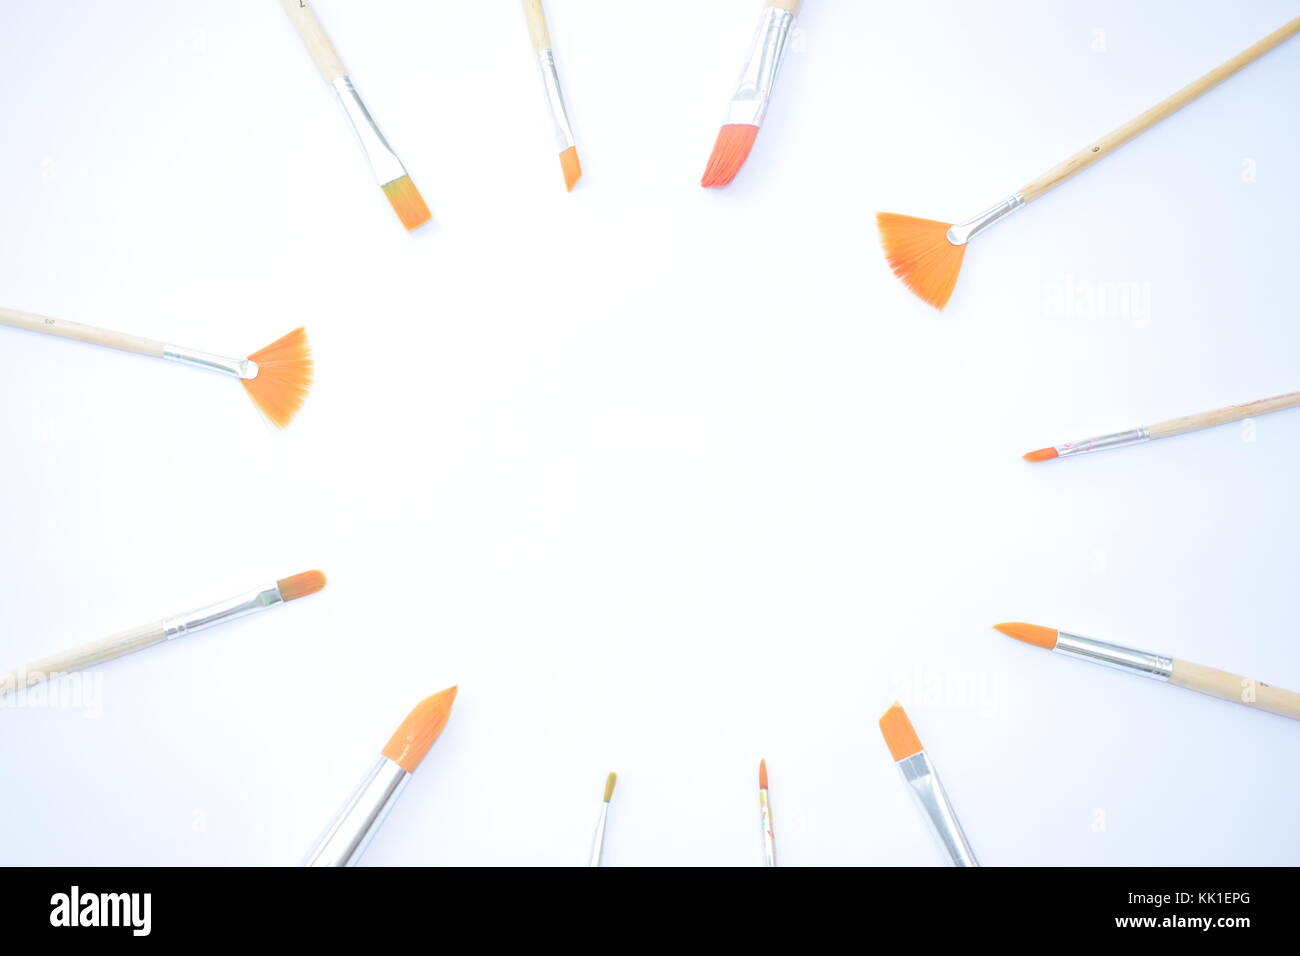 artist Paint brushes on a plain background Stock Photo